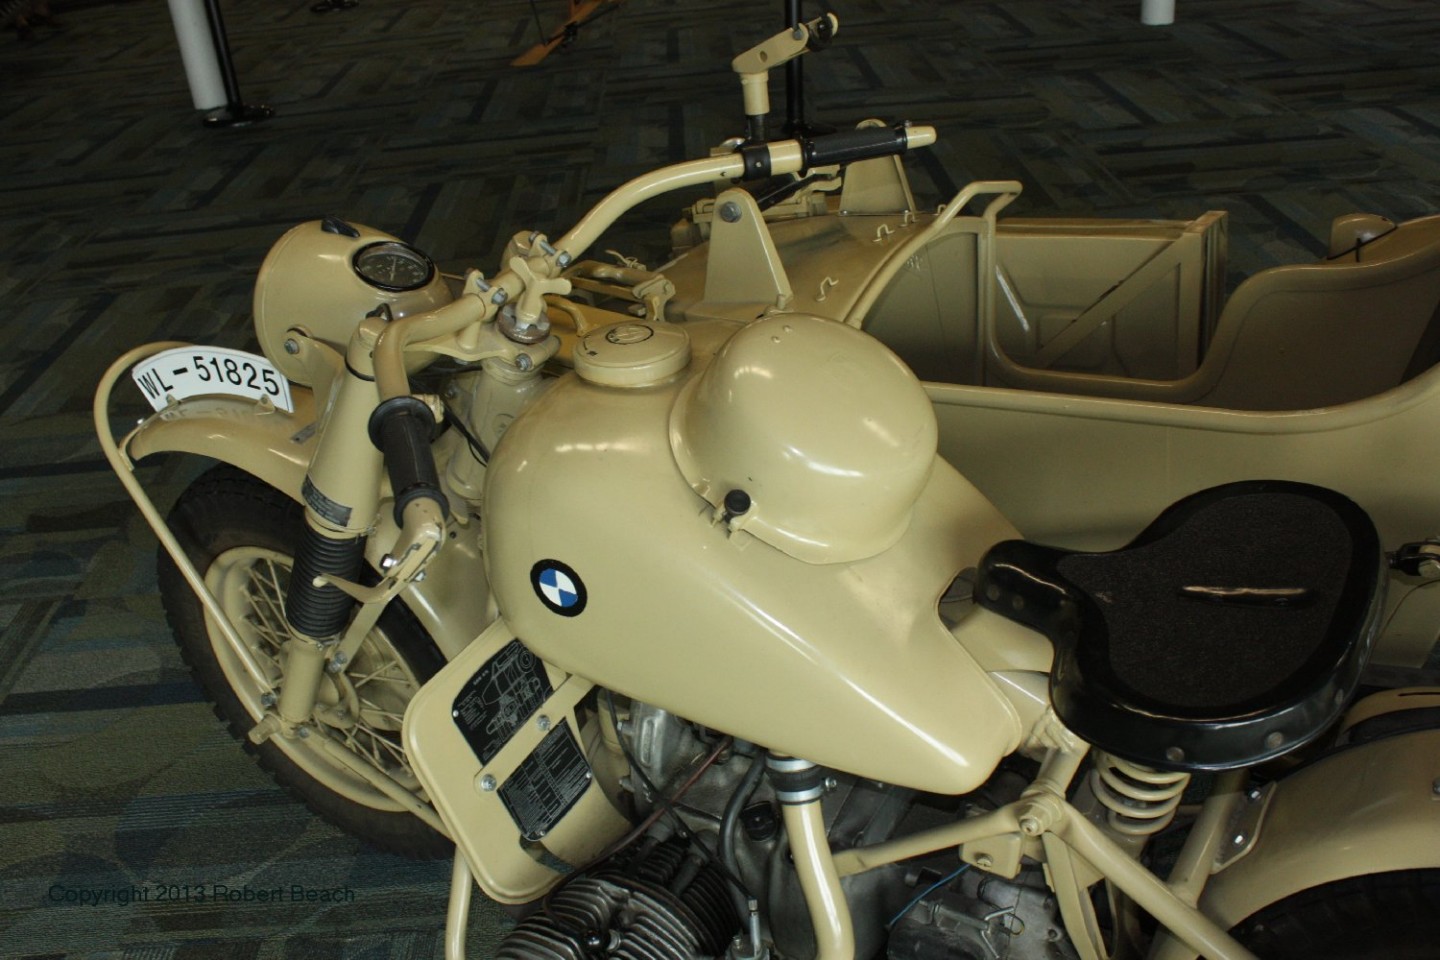 BMW_Mtrcycle_sidecar_cycle_top center_frm left